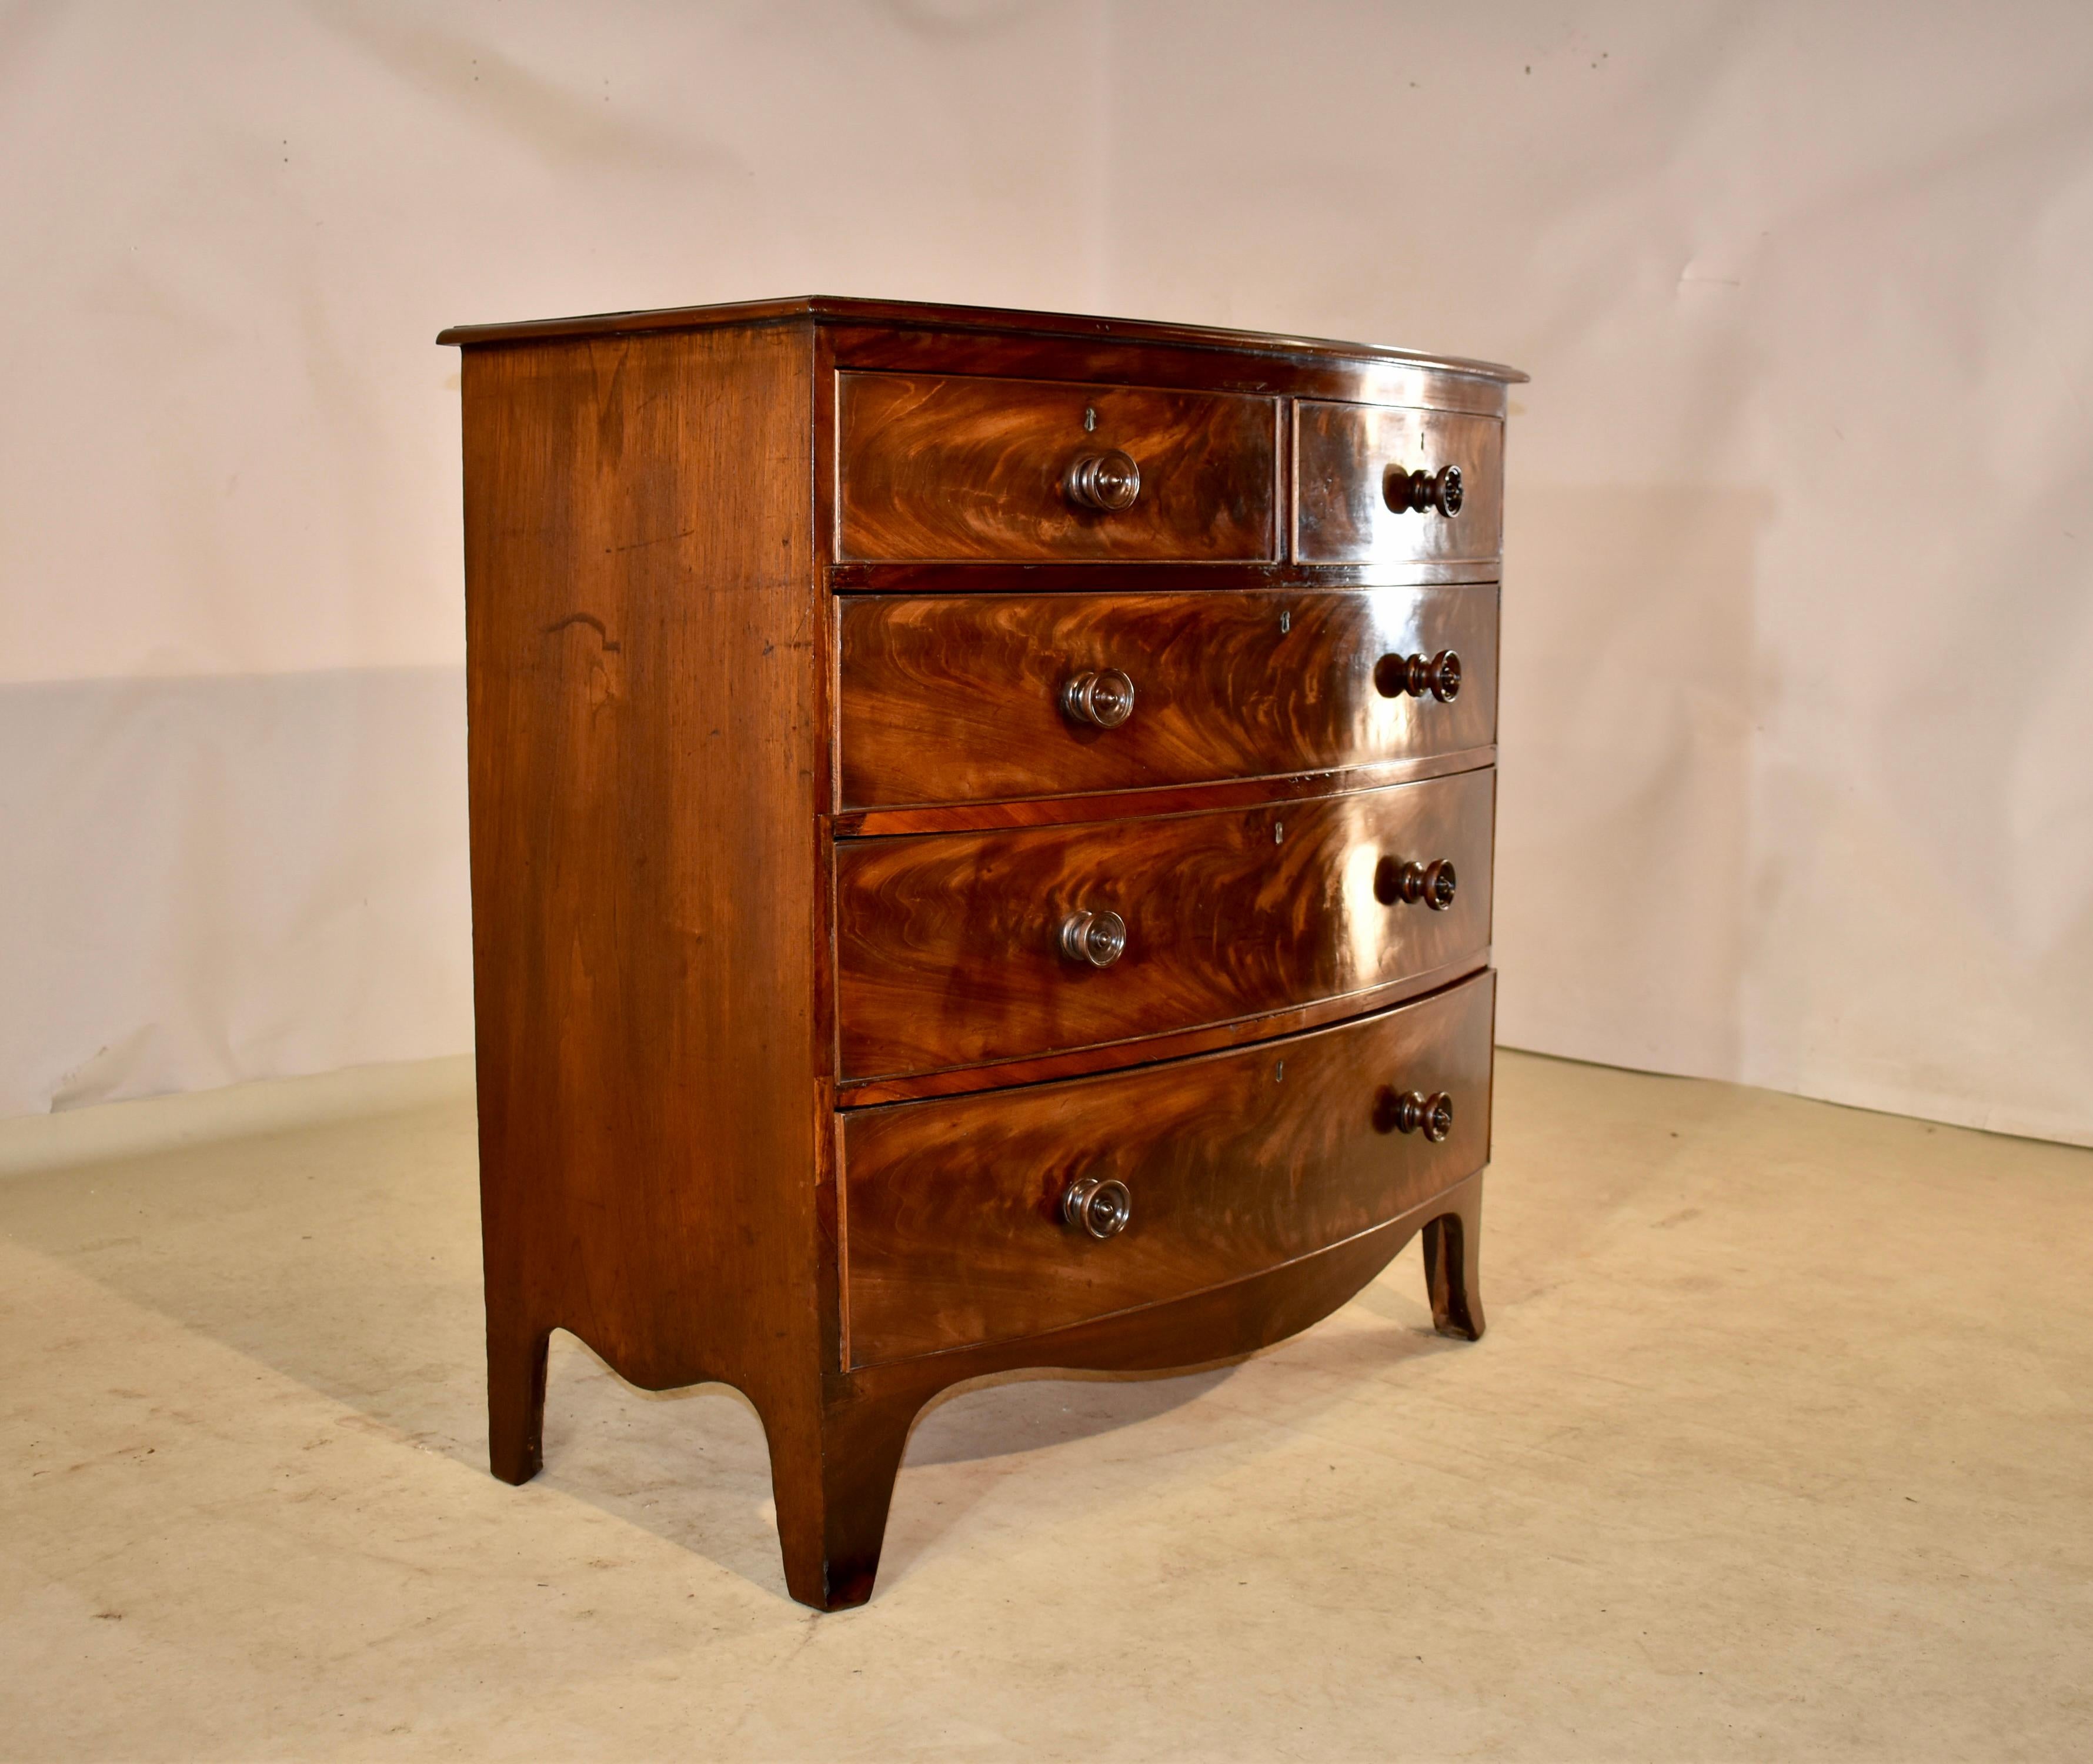 19th Century mahogany bow front chest of drawers from England with a nicely grained top, which also has a beveled edge, following down to simple sides and a bow front with two drawers over three drawers. The drawer fronts have gorgeous flame